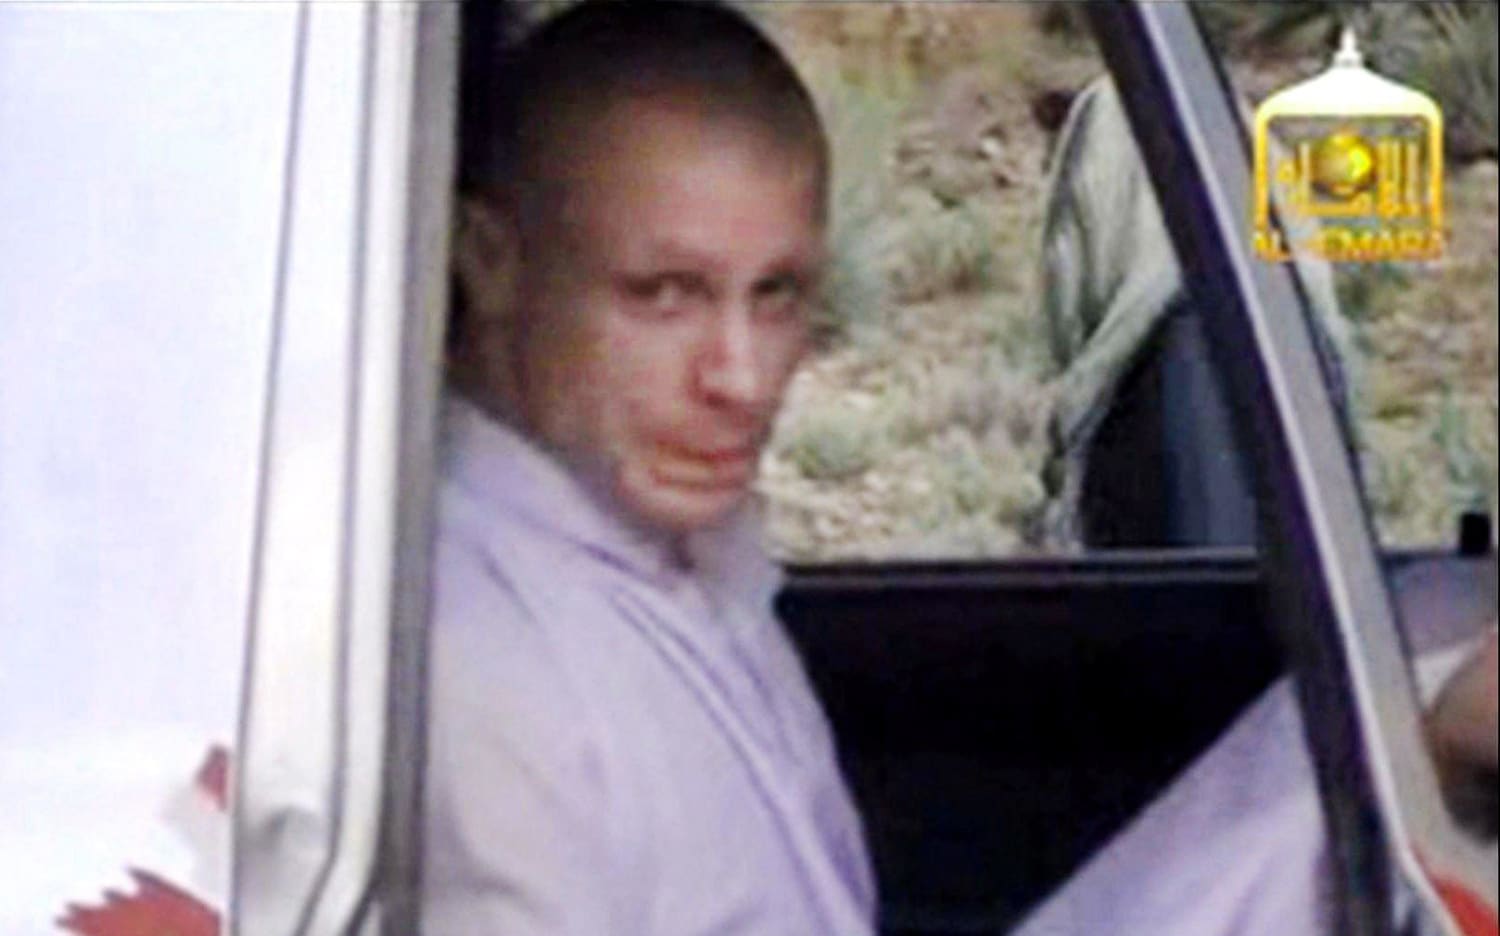 Sgt. BOWE BERGDAHL Has Not Been Reunited With His Parents - NBC News.